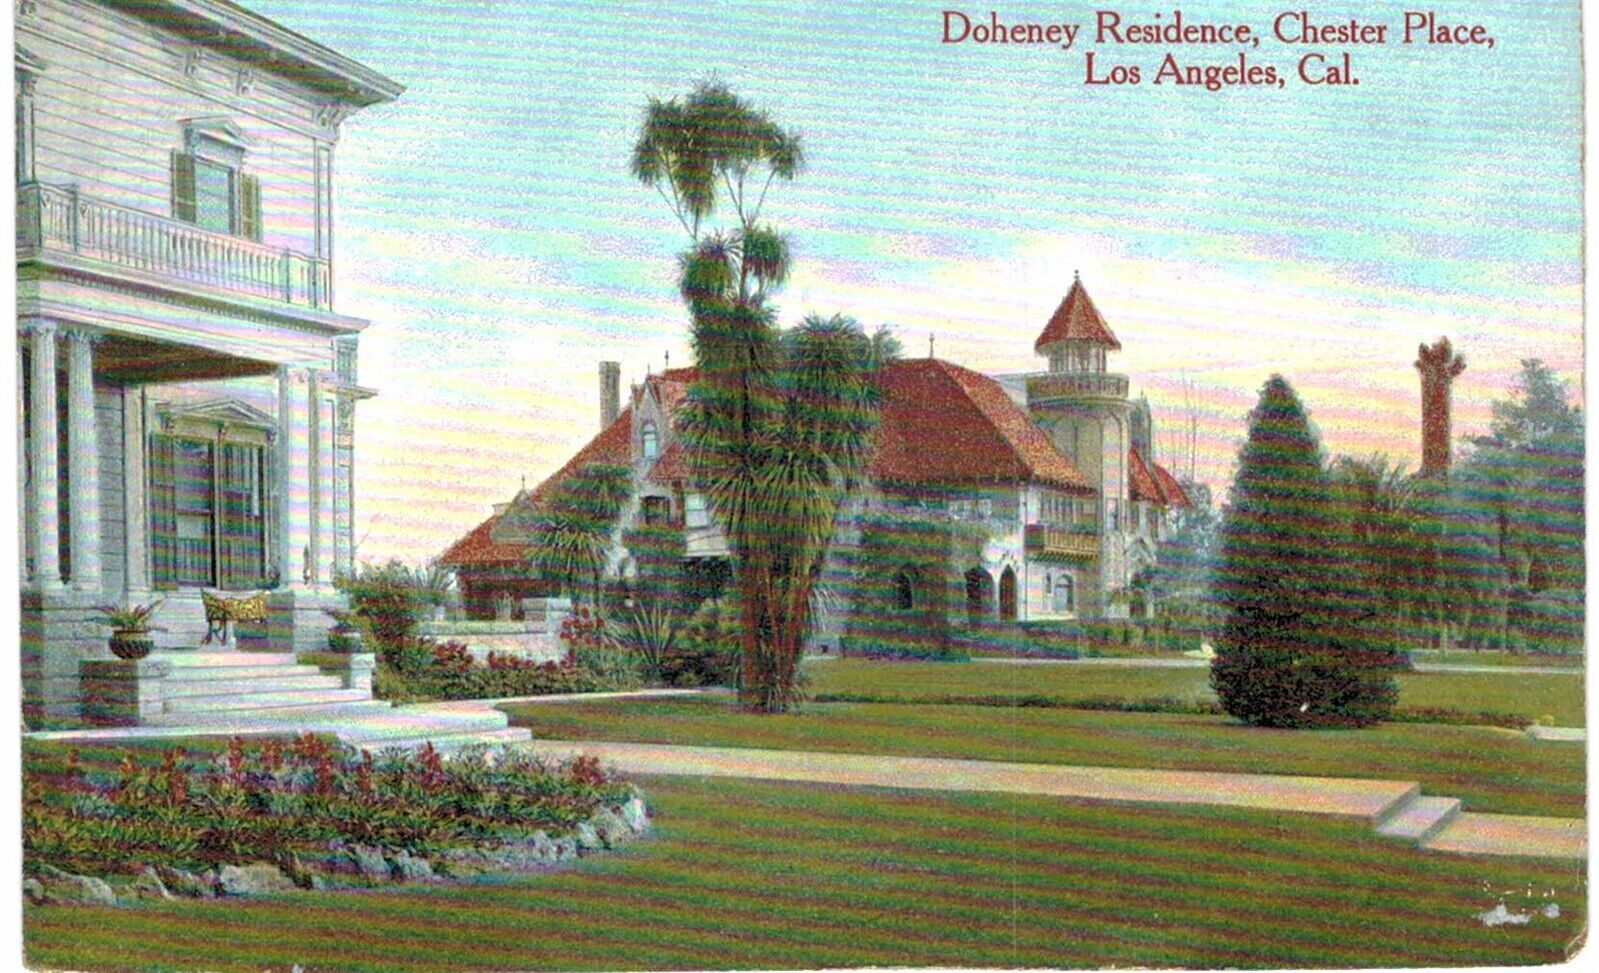 Los Angeles Doheney Residence Chester Place 1910  CA